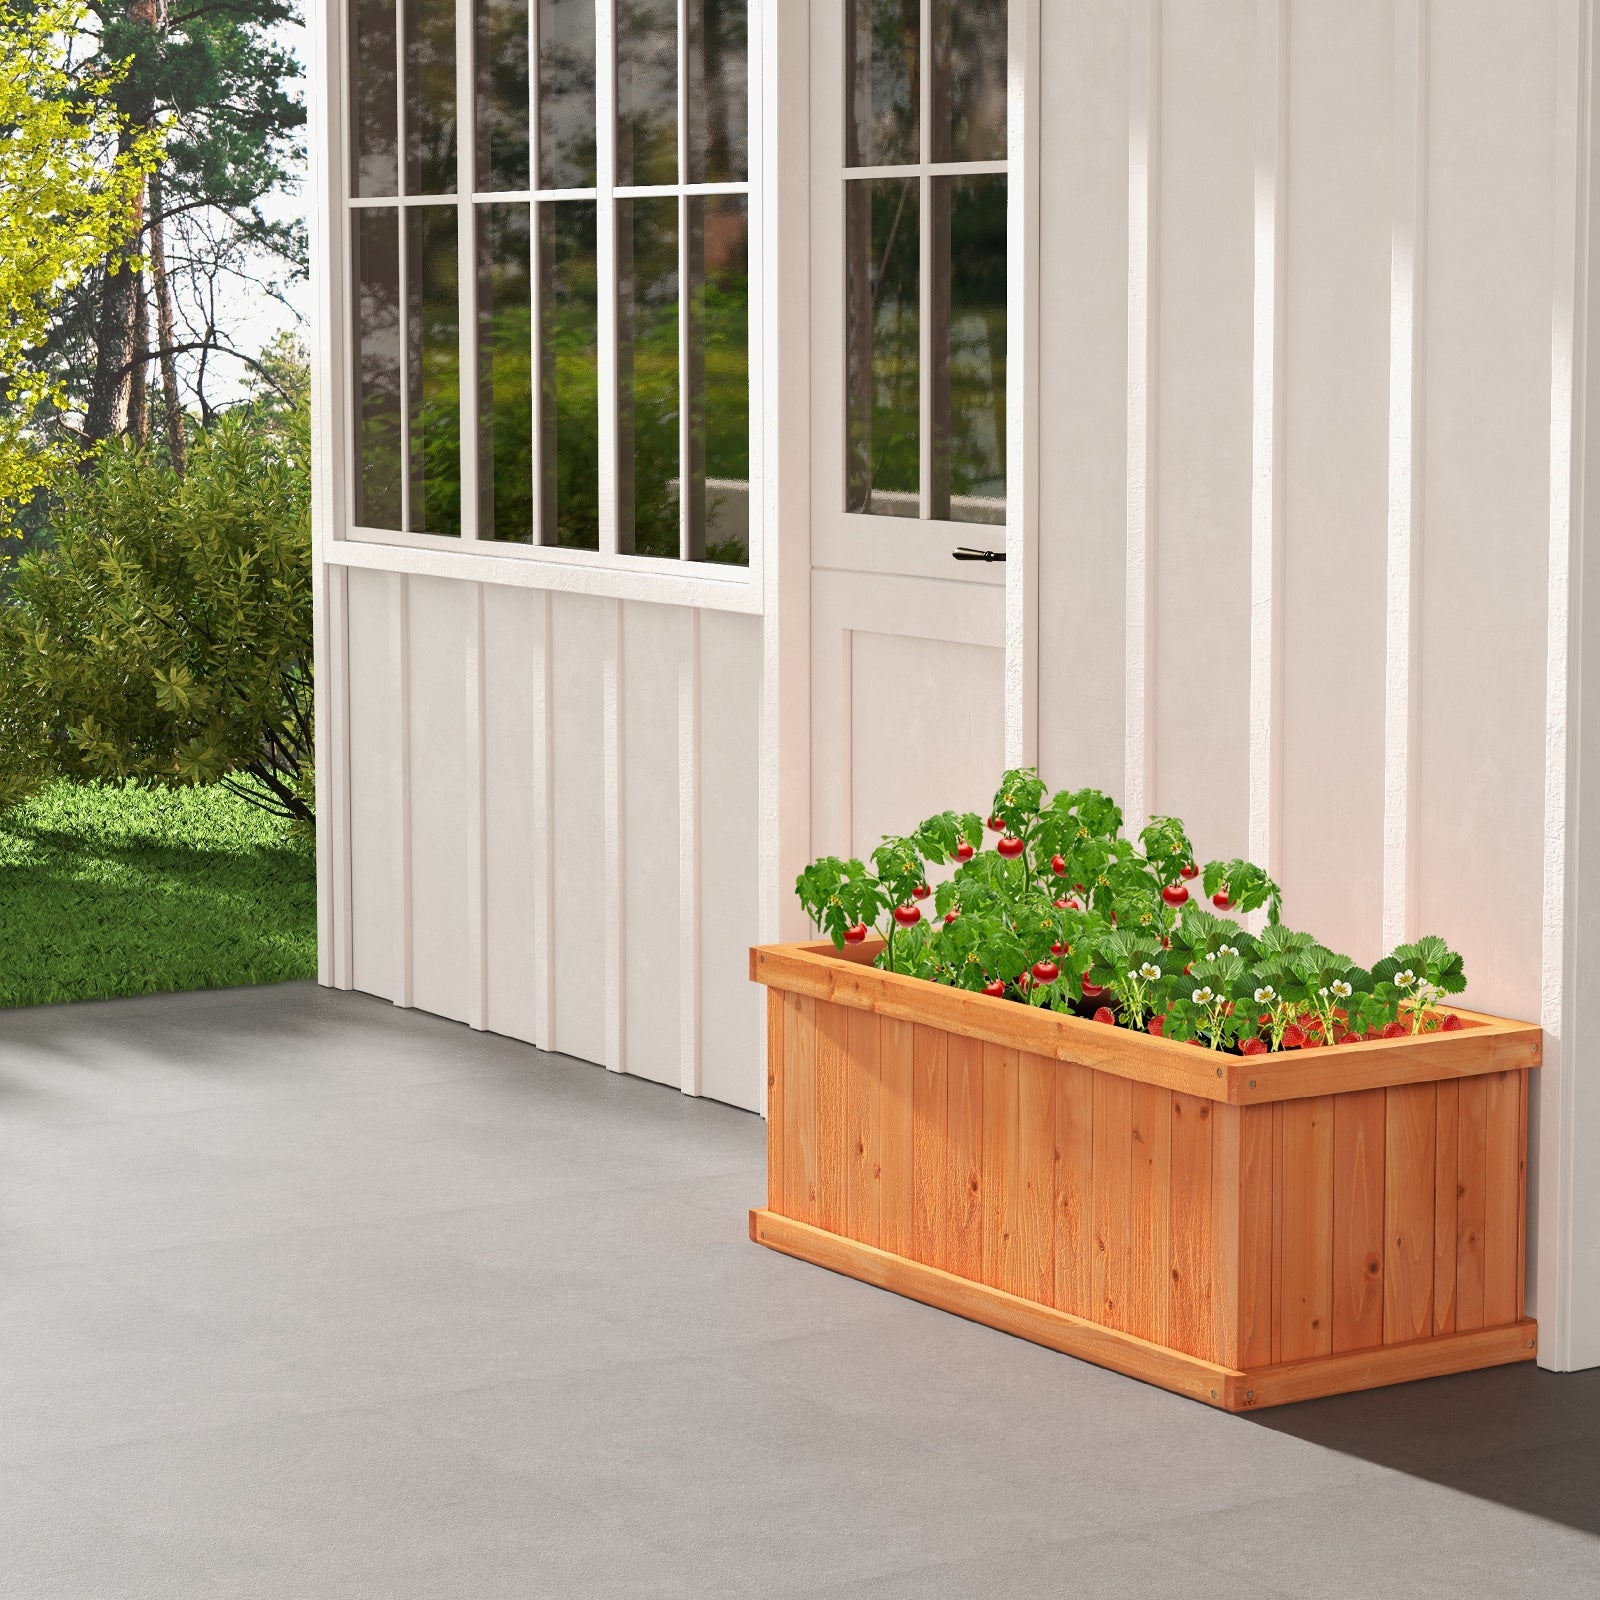 Raised Garden Bed Wooden Planter Box with 4 Drainage Holes and Detachable Bottom Panels at Gallery Canada